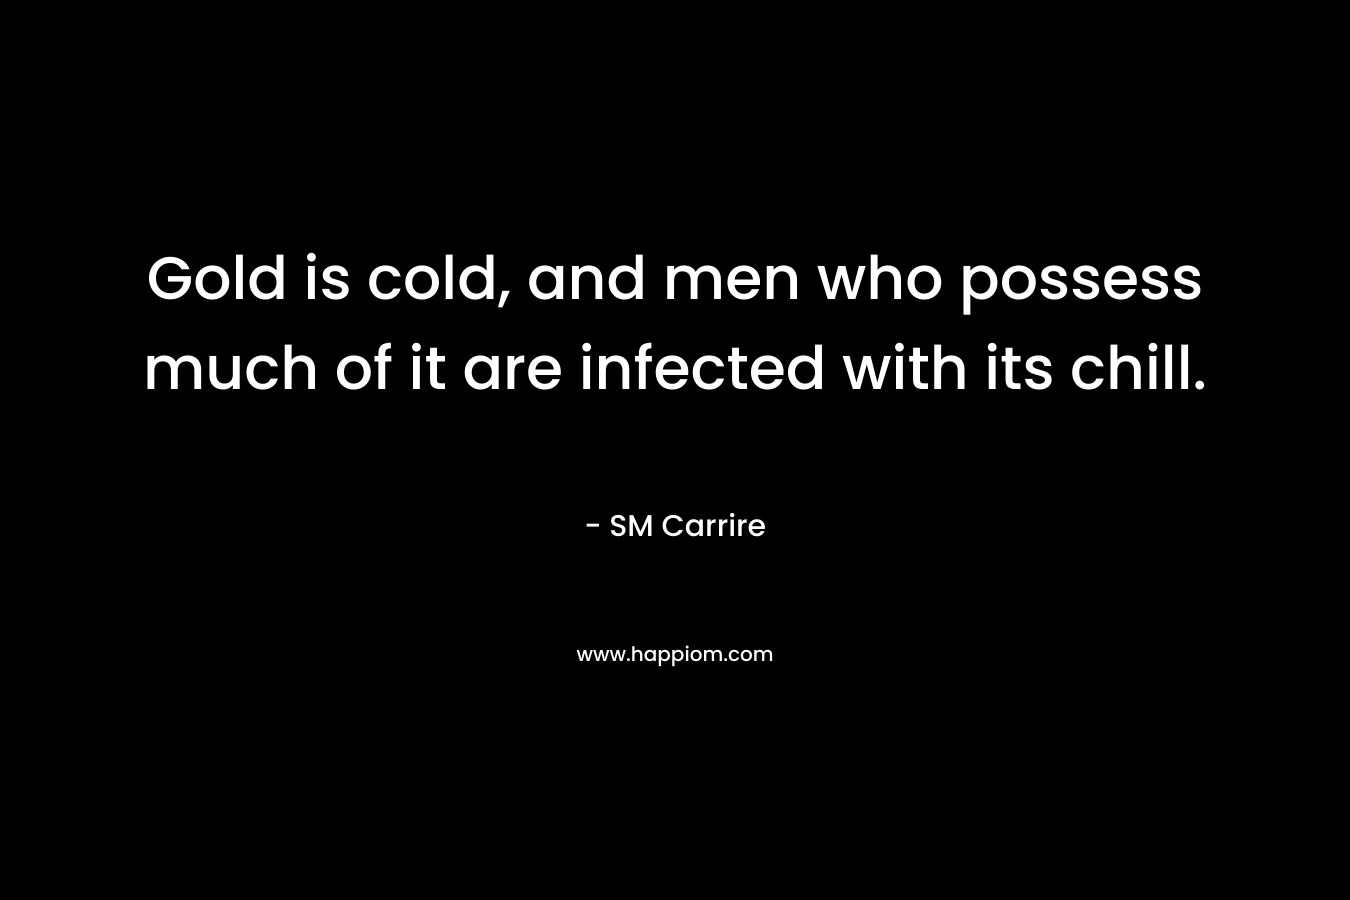 Gold is cold, and men who possess much of it are infected with its chill.